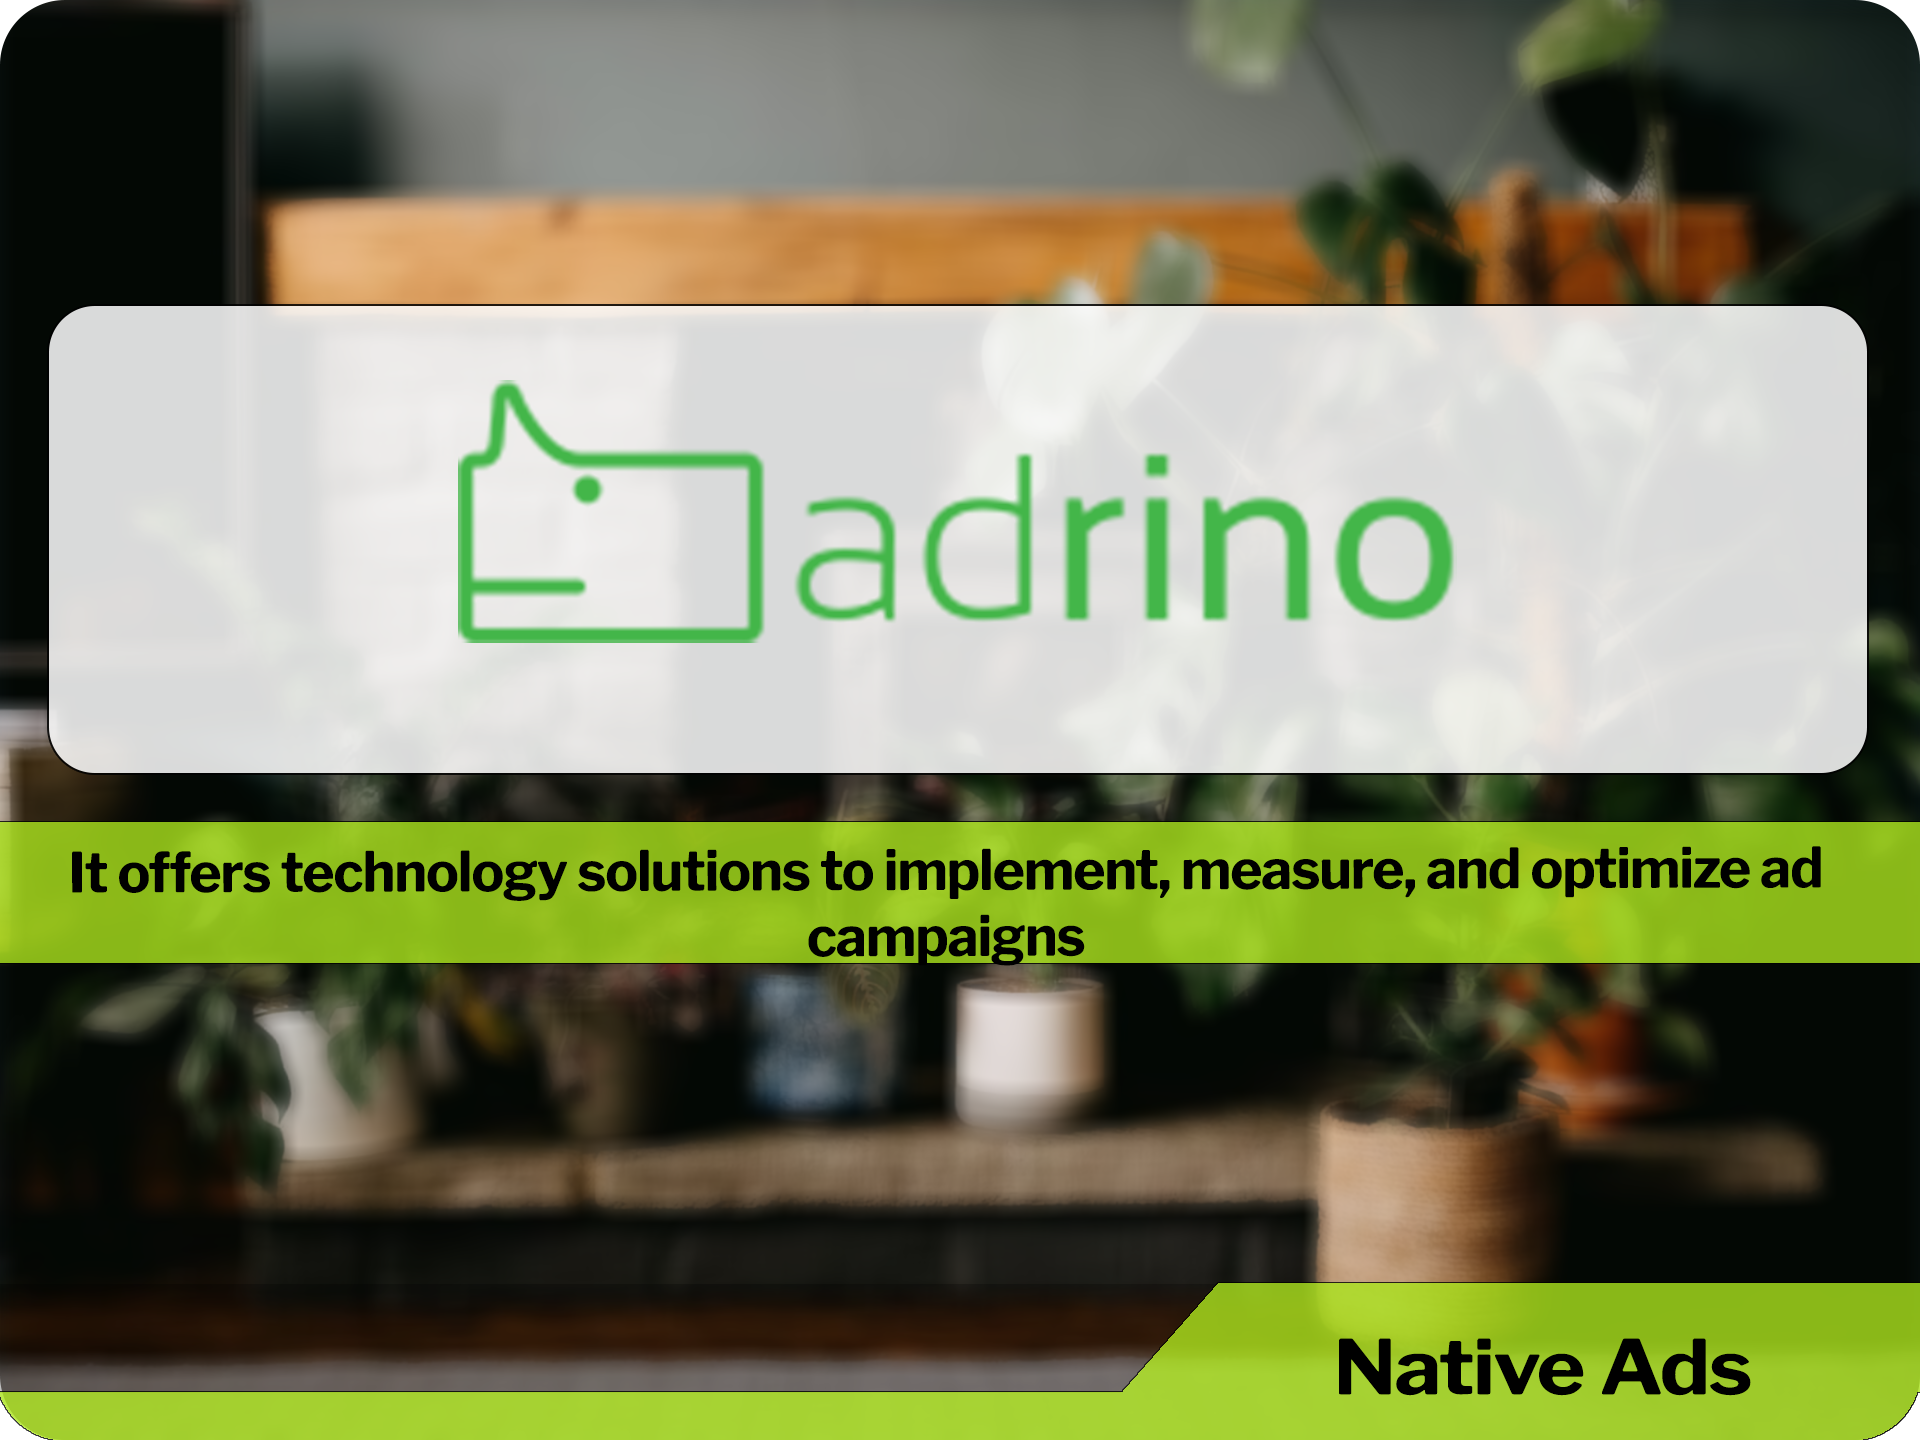 Adrino is Poland’s largest mobile ad network